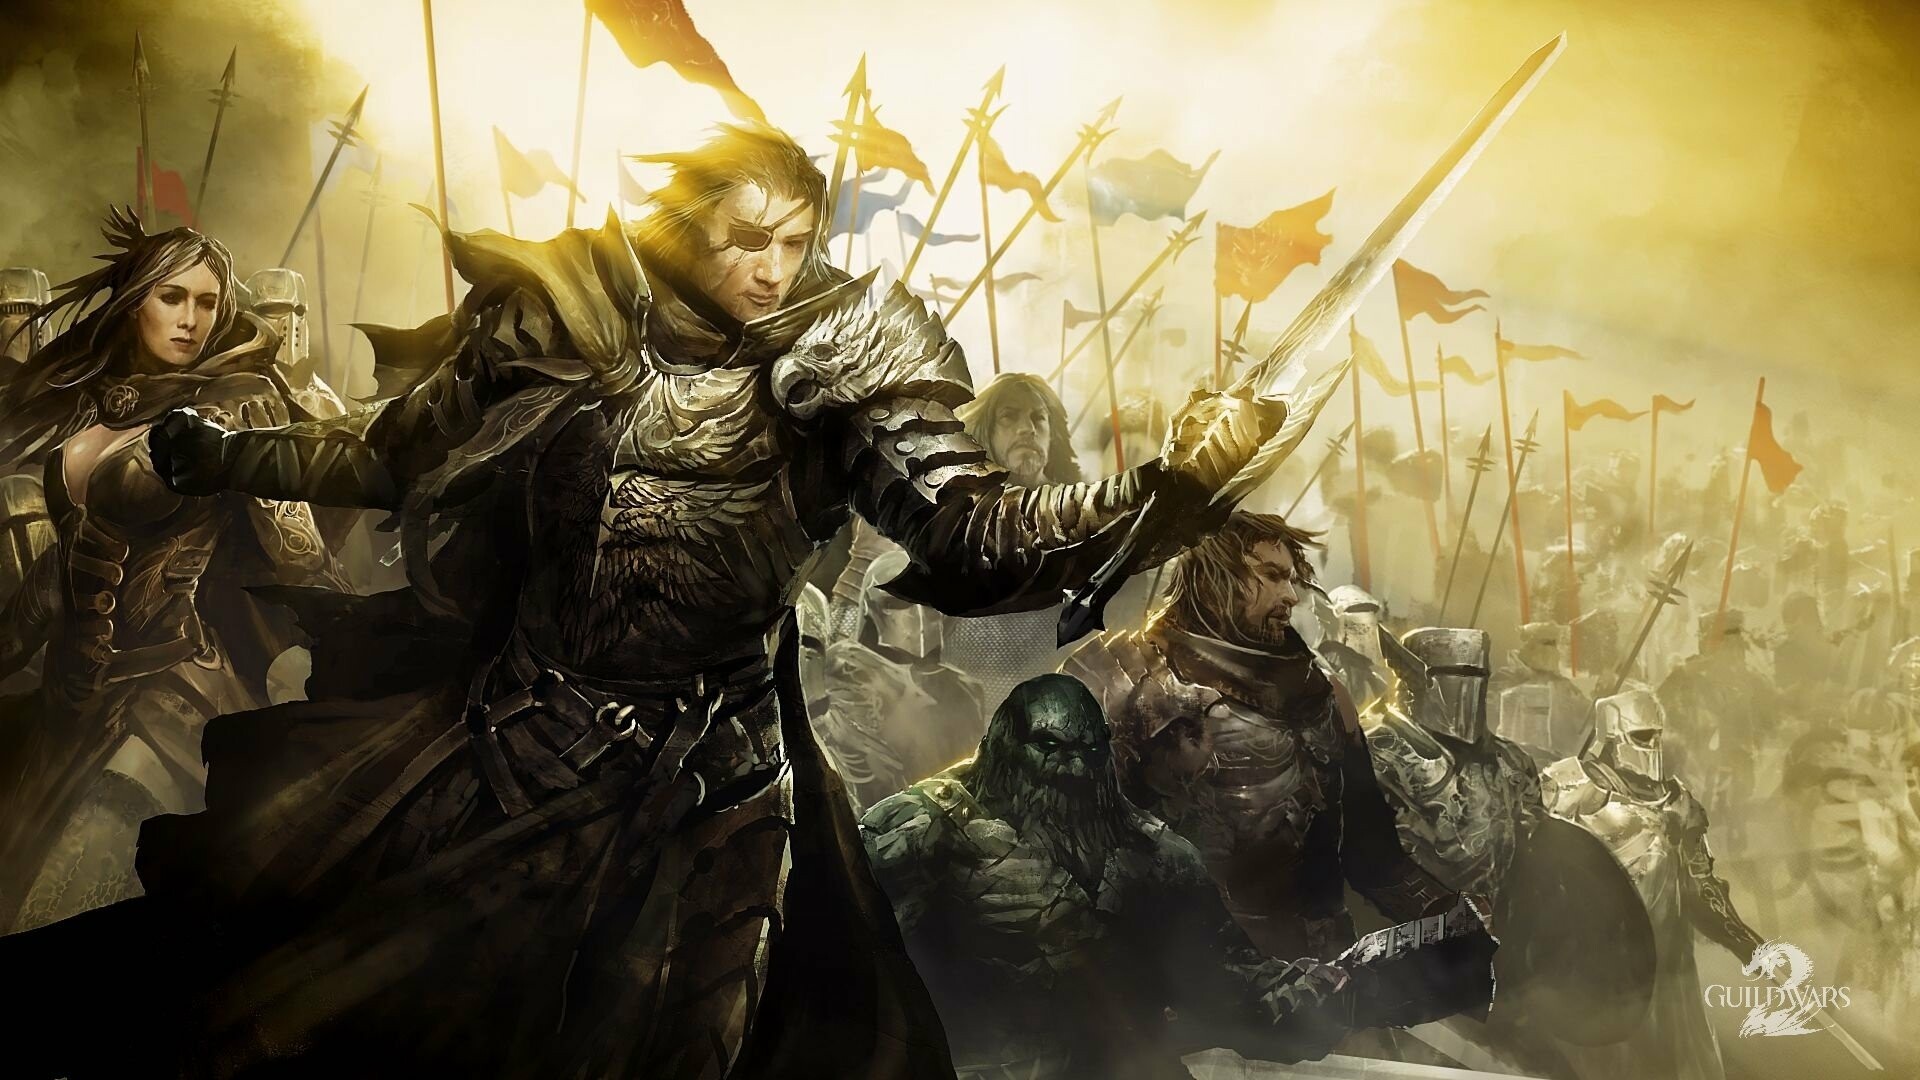 Guild Wars: Guilds, GW's core element, social units closely linked with the game mechanics. 1920x1080 Full HD Wallpaper.